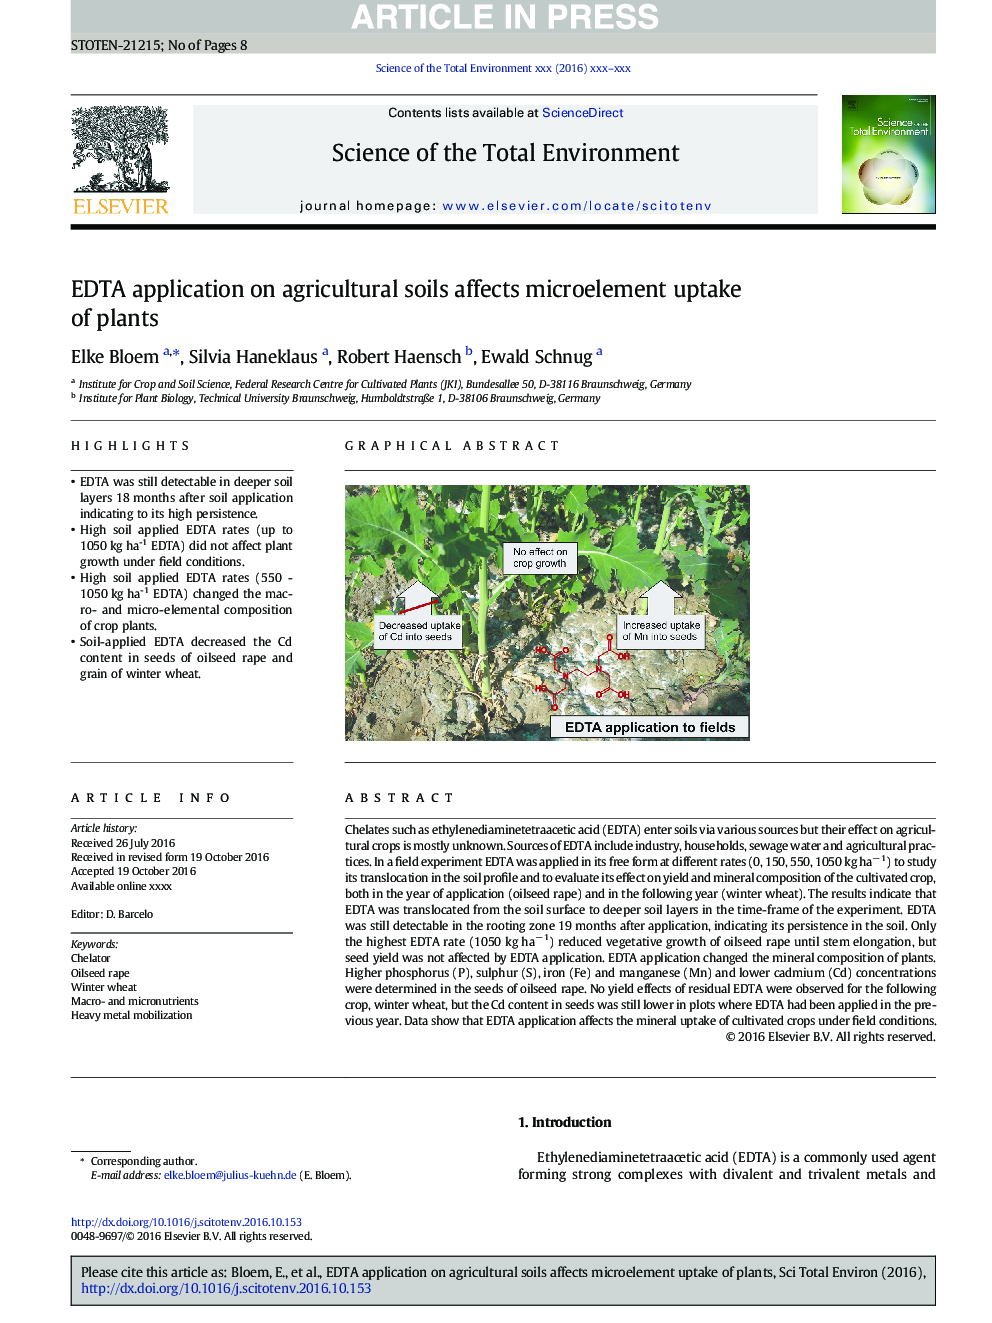 EDTA application on agricultural soils affects microelement uptake of plants